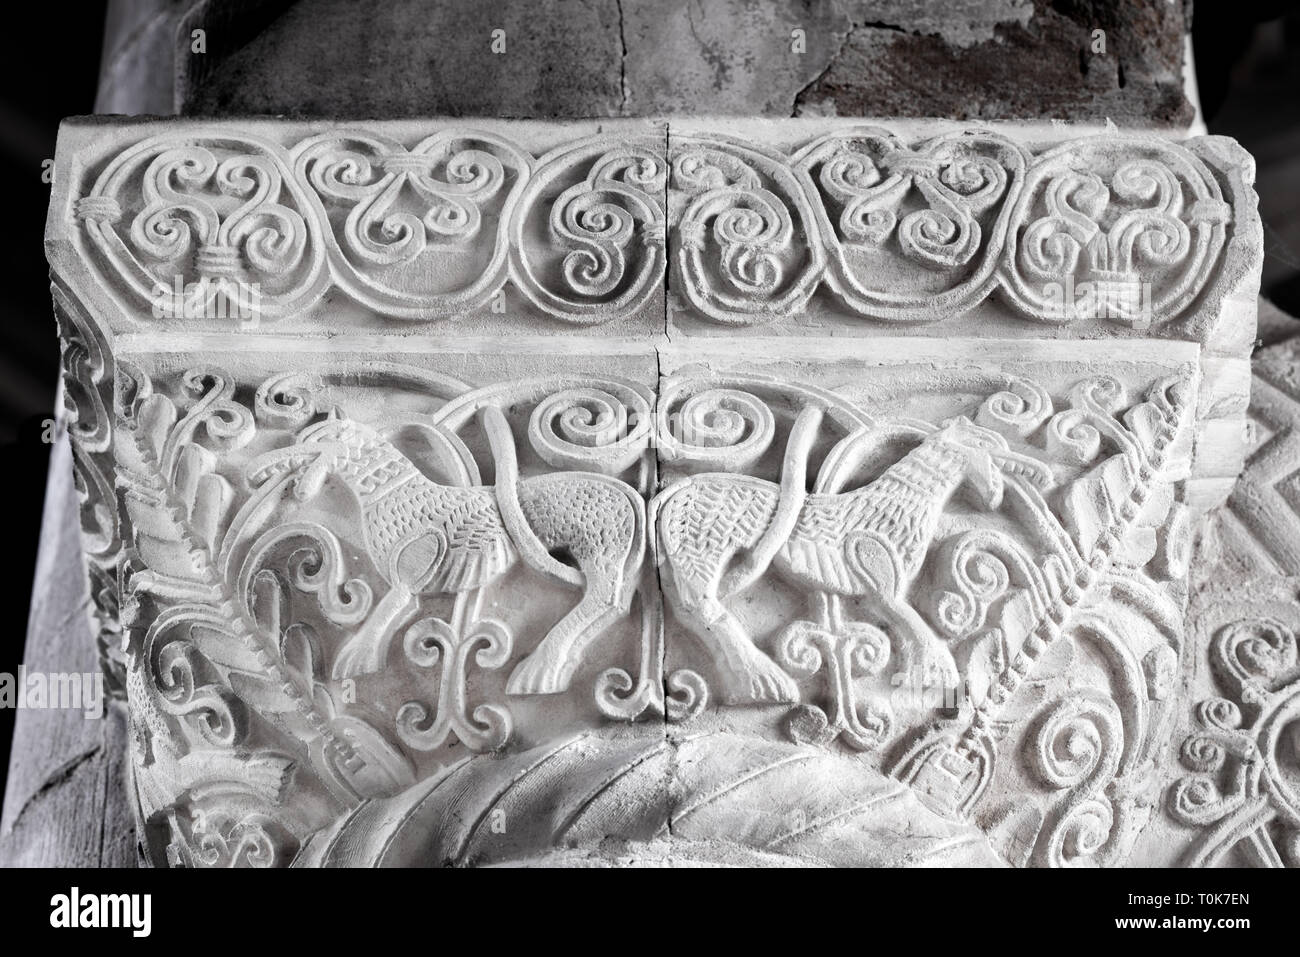 Carved, decorative stonework on the capital of a pillar at the norman built church named St Peter in Northampton, England. Stock Photo